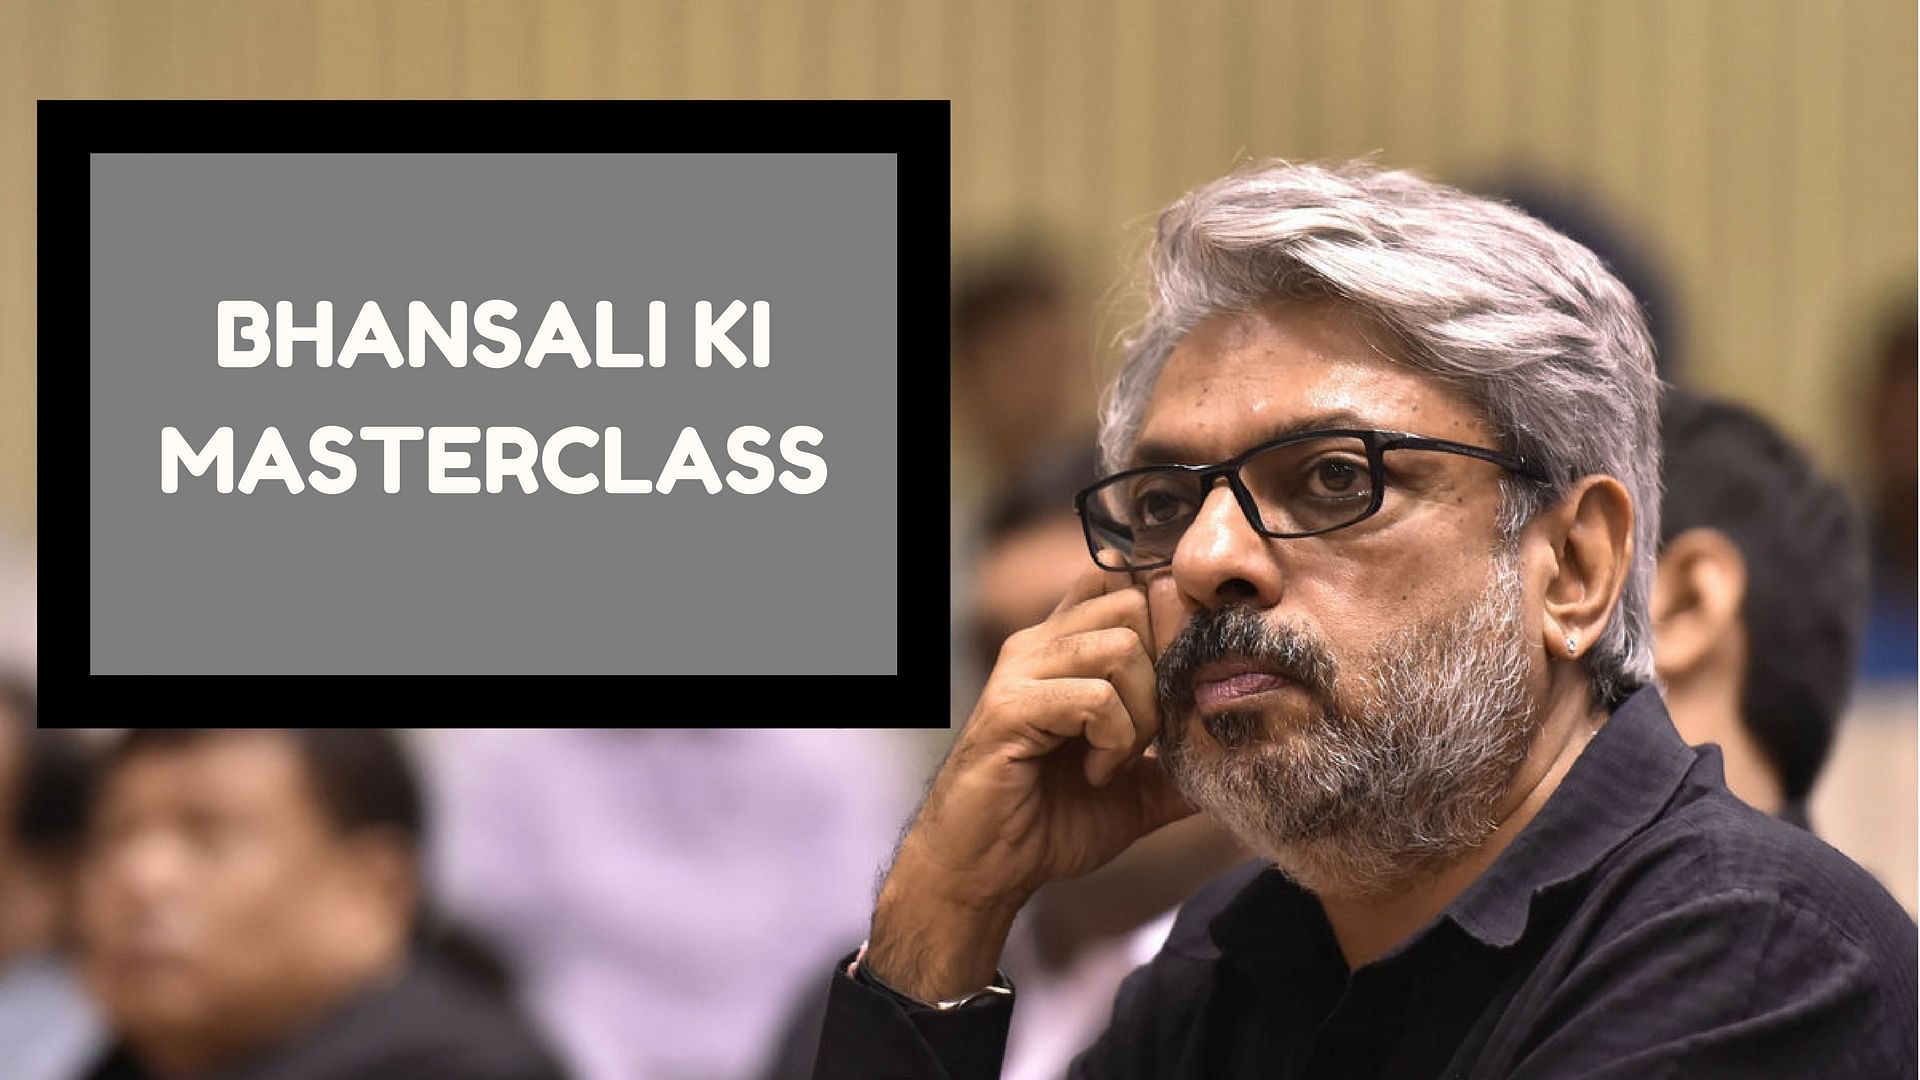 Sanjay Leela Bhansali wondering how he could make this function bigger, more colourful and melodramatic.